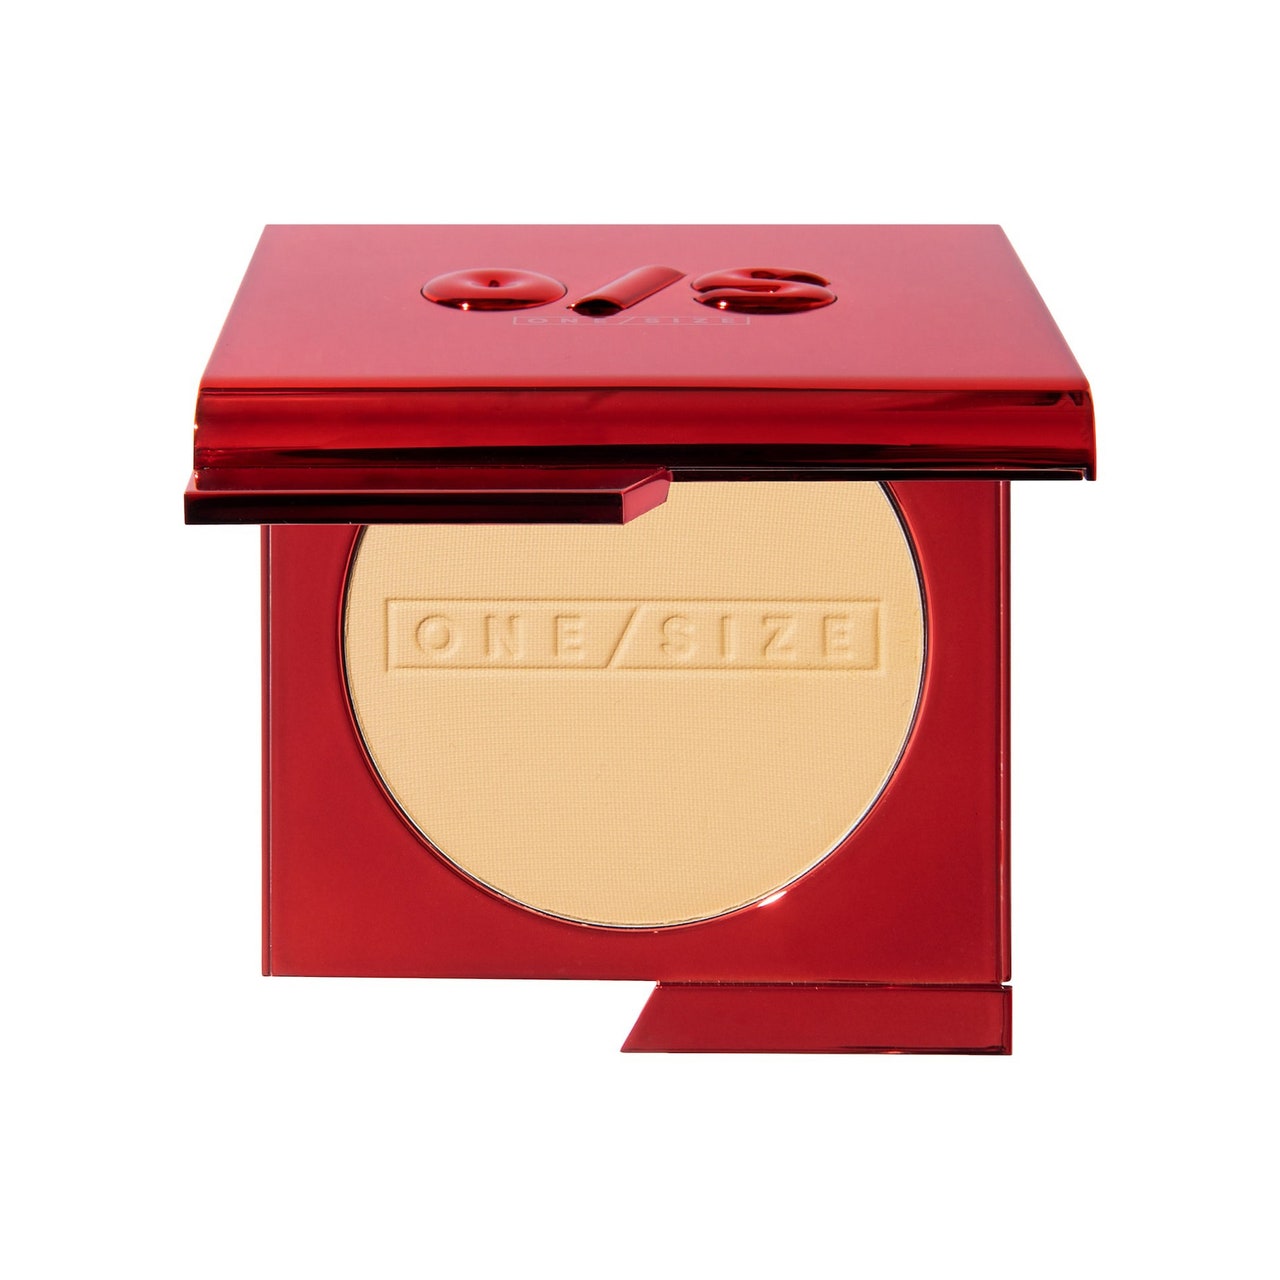 One/Size Turn Up The Base Versatile Powder Foundation open red chrome compact of pressed powder foundation on white background